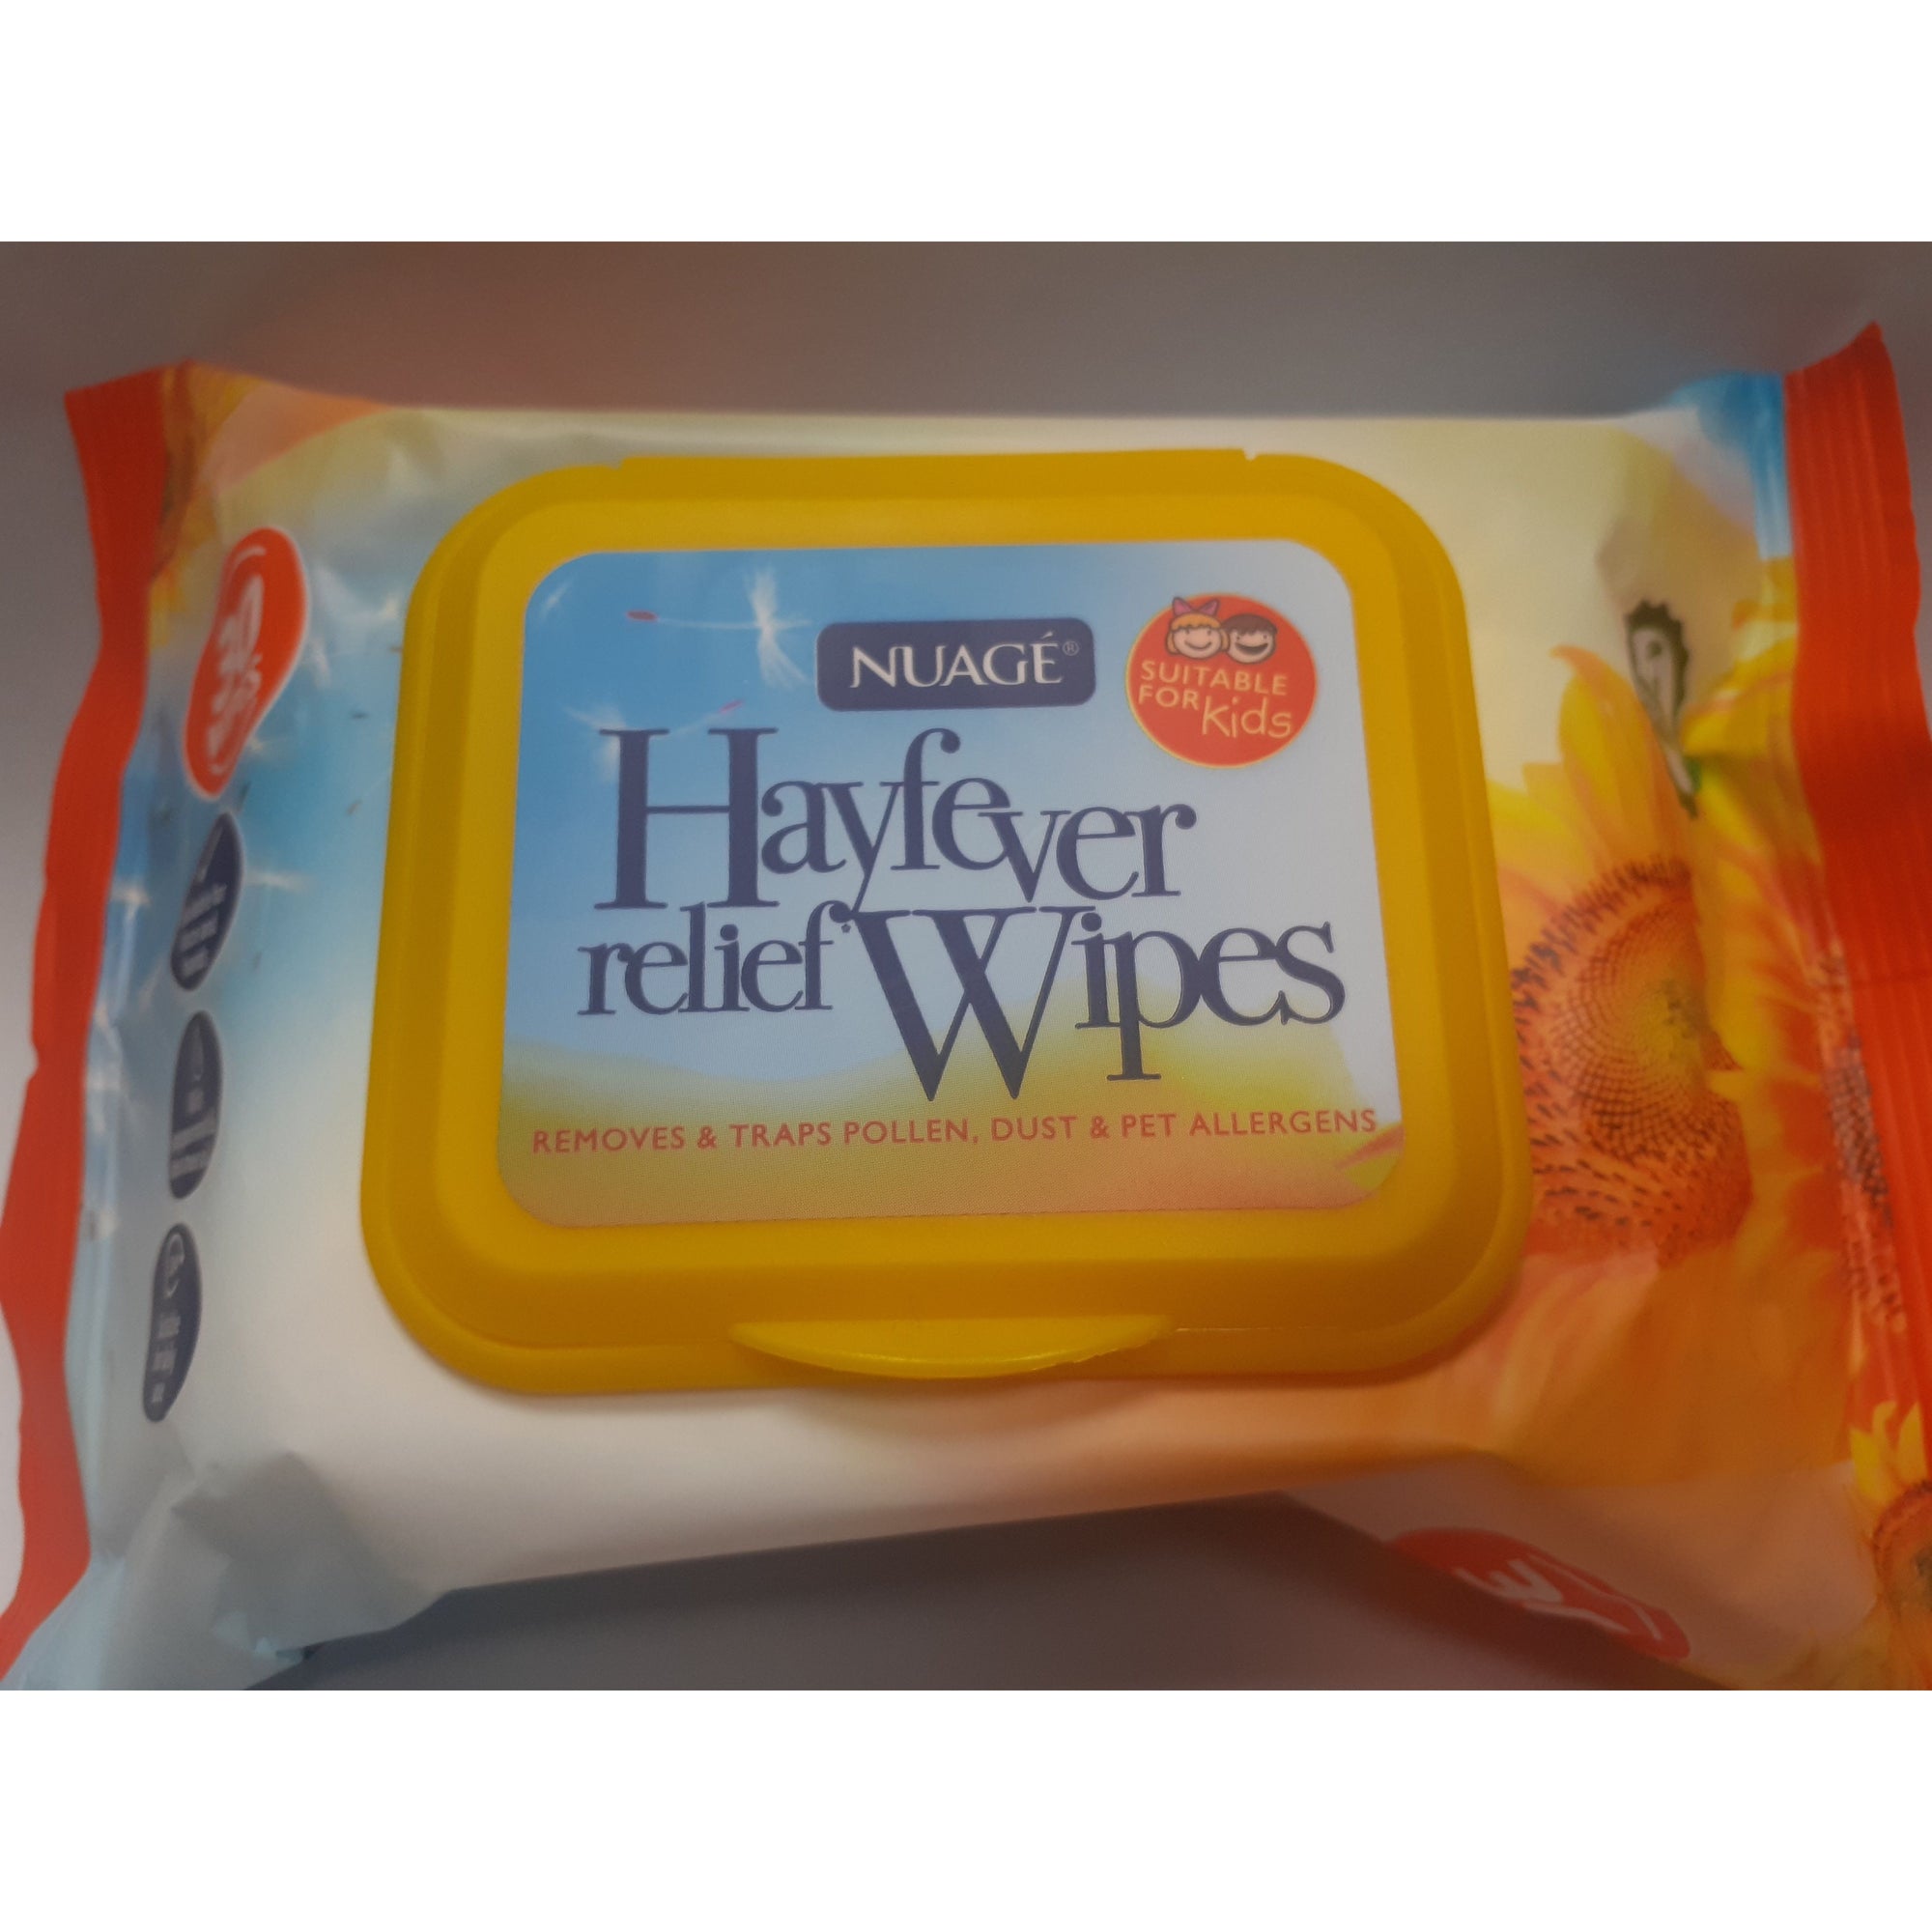 Nuage Hayfever Relief Wipes 30s